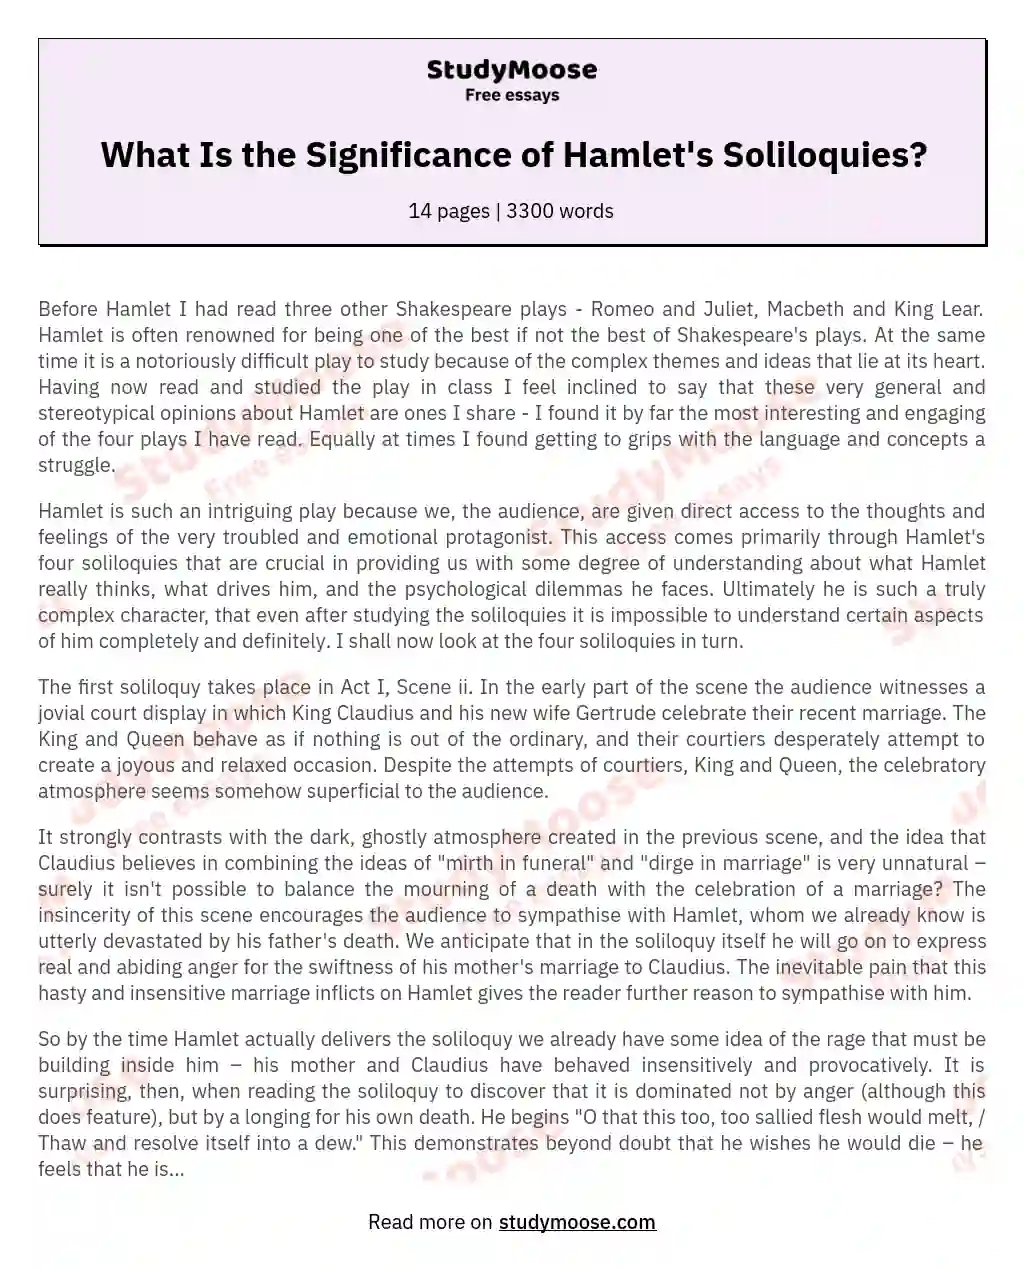 What Is the Significance of Hamlet's Soliloquies?